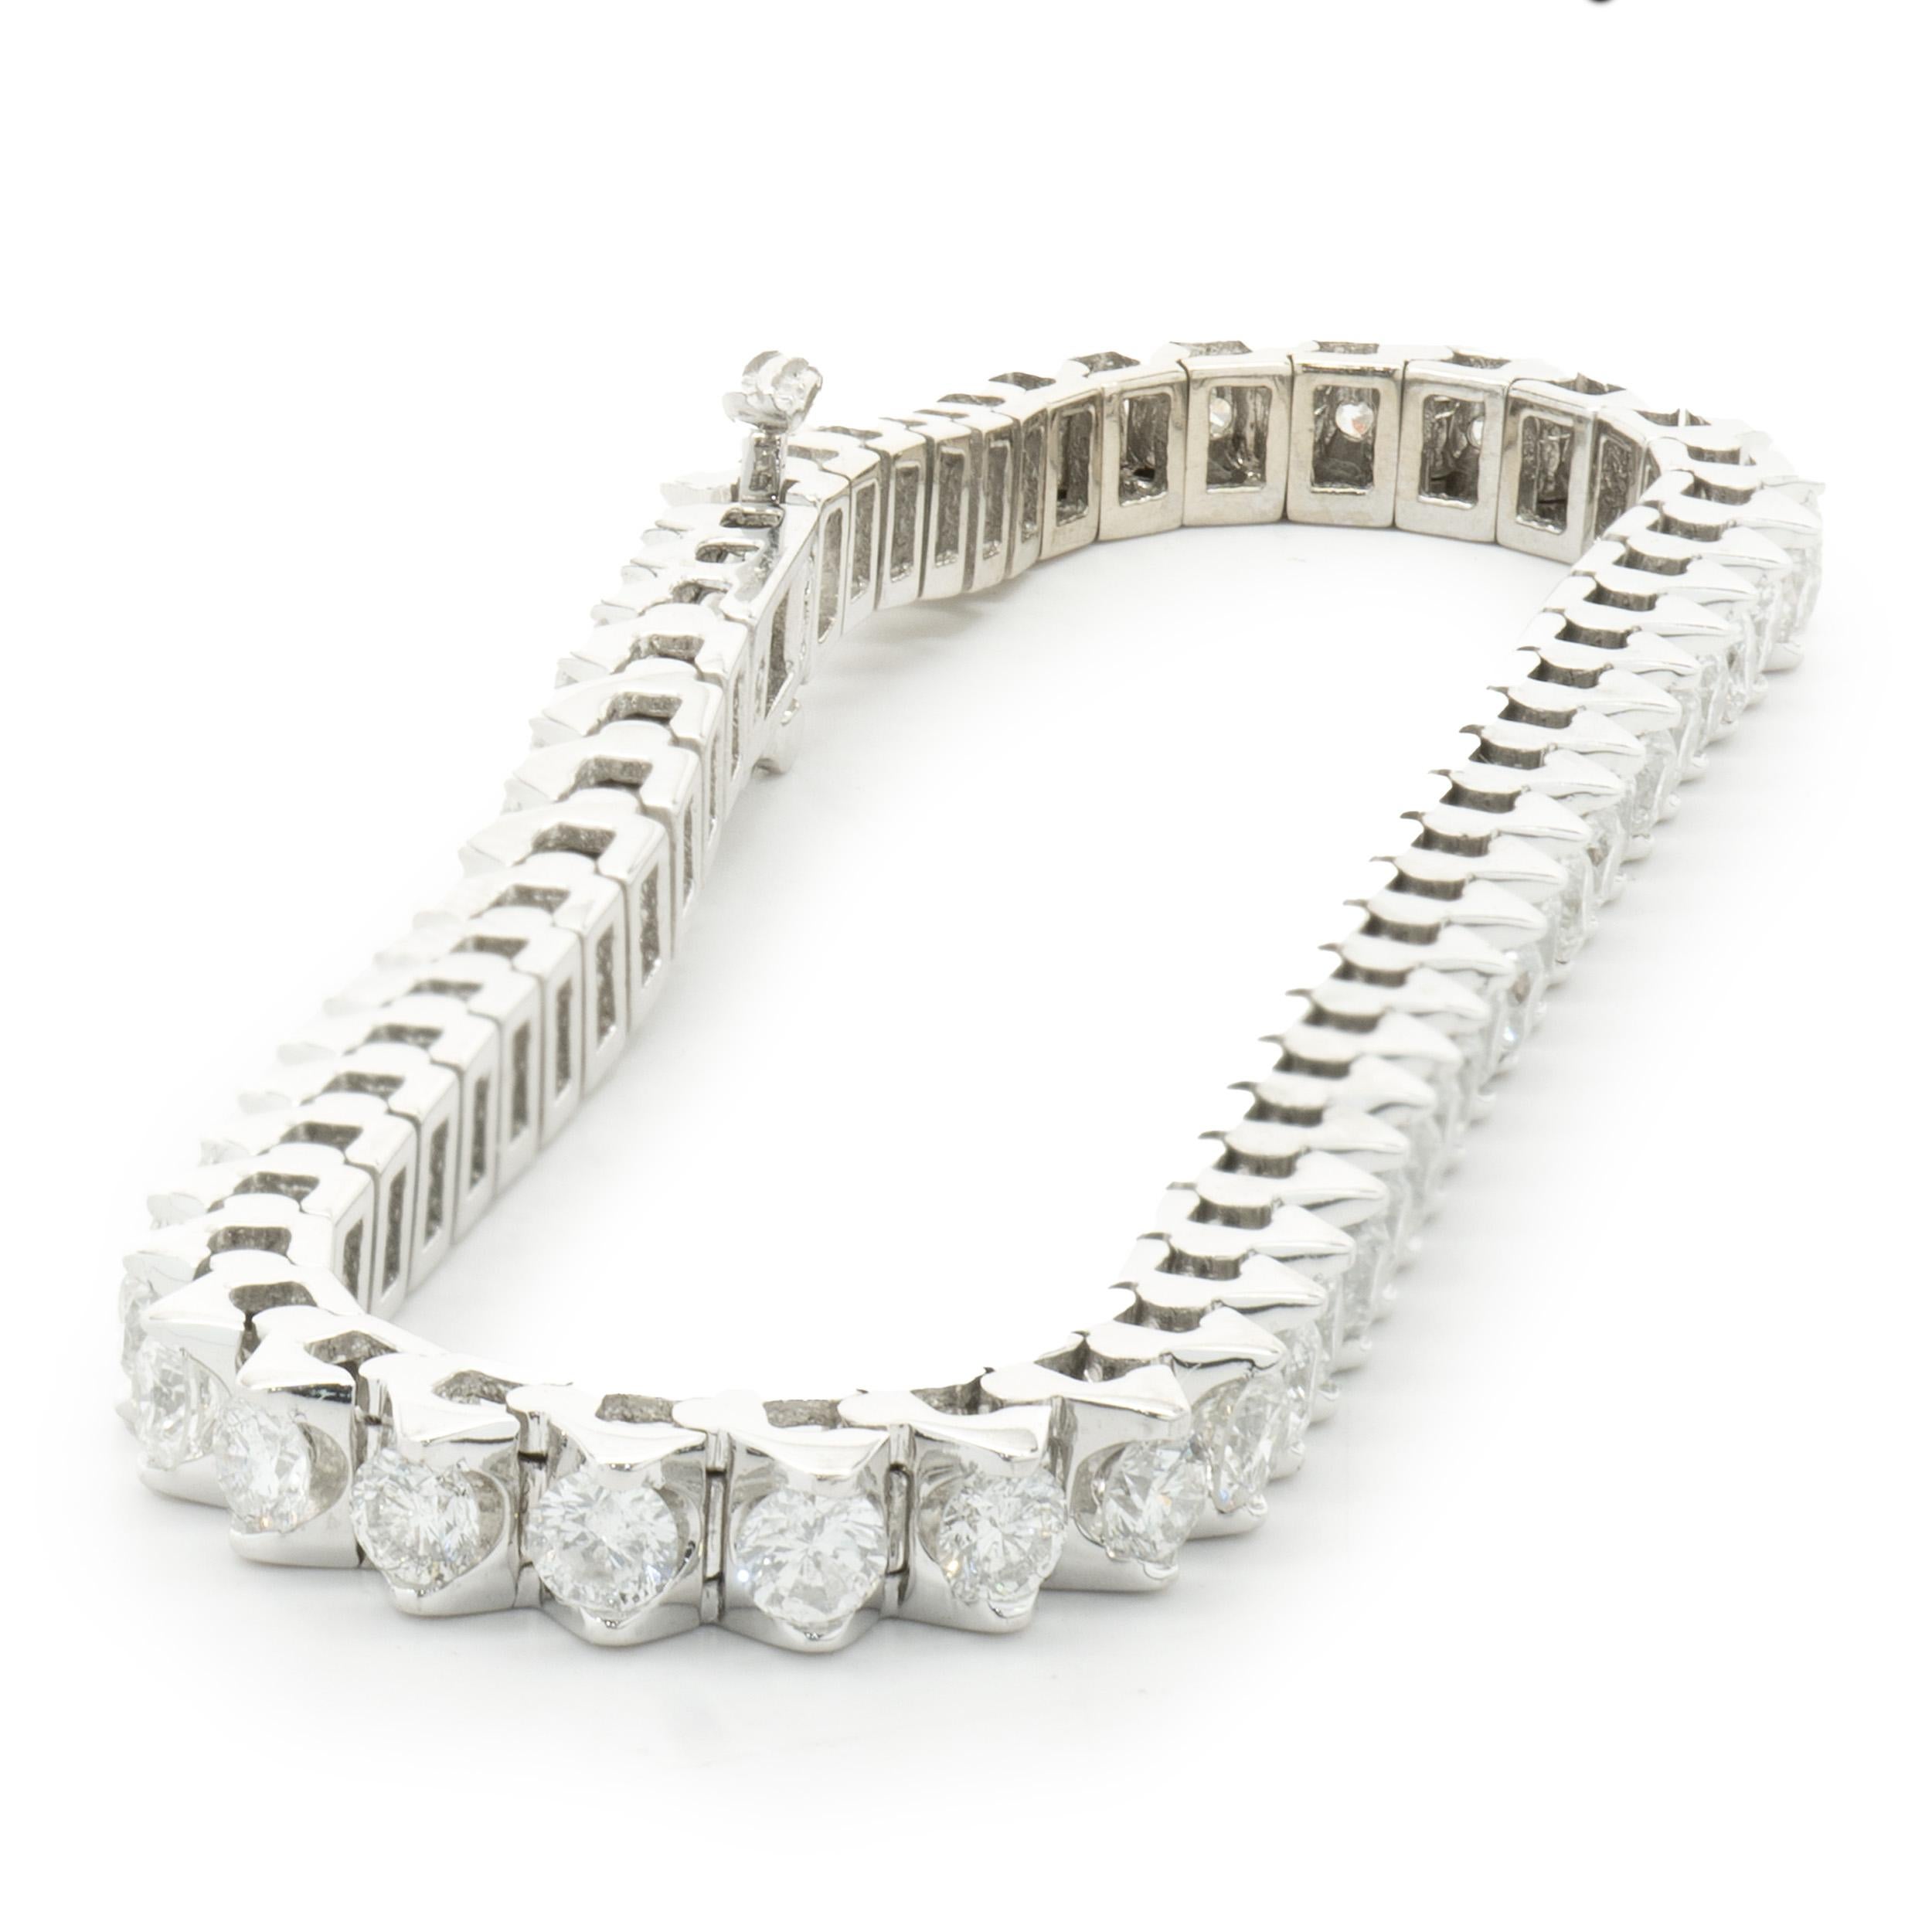 Designer: custom design
Material: 14K white gold
Diamond: 56 round brilliant = 5.00cttw
Color: H
Clarity: SI2
Dimensions: bracelet will fit up to a 6.75-inch wrist
Weight: 17.89 grams